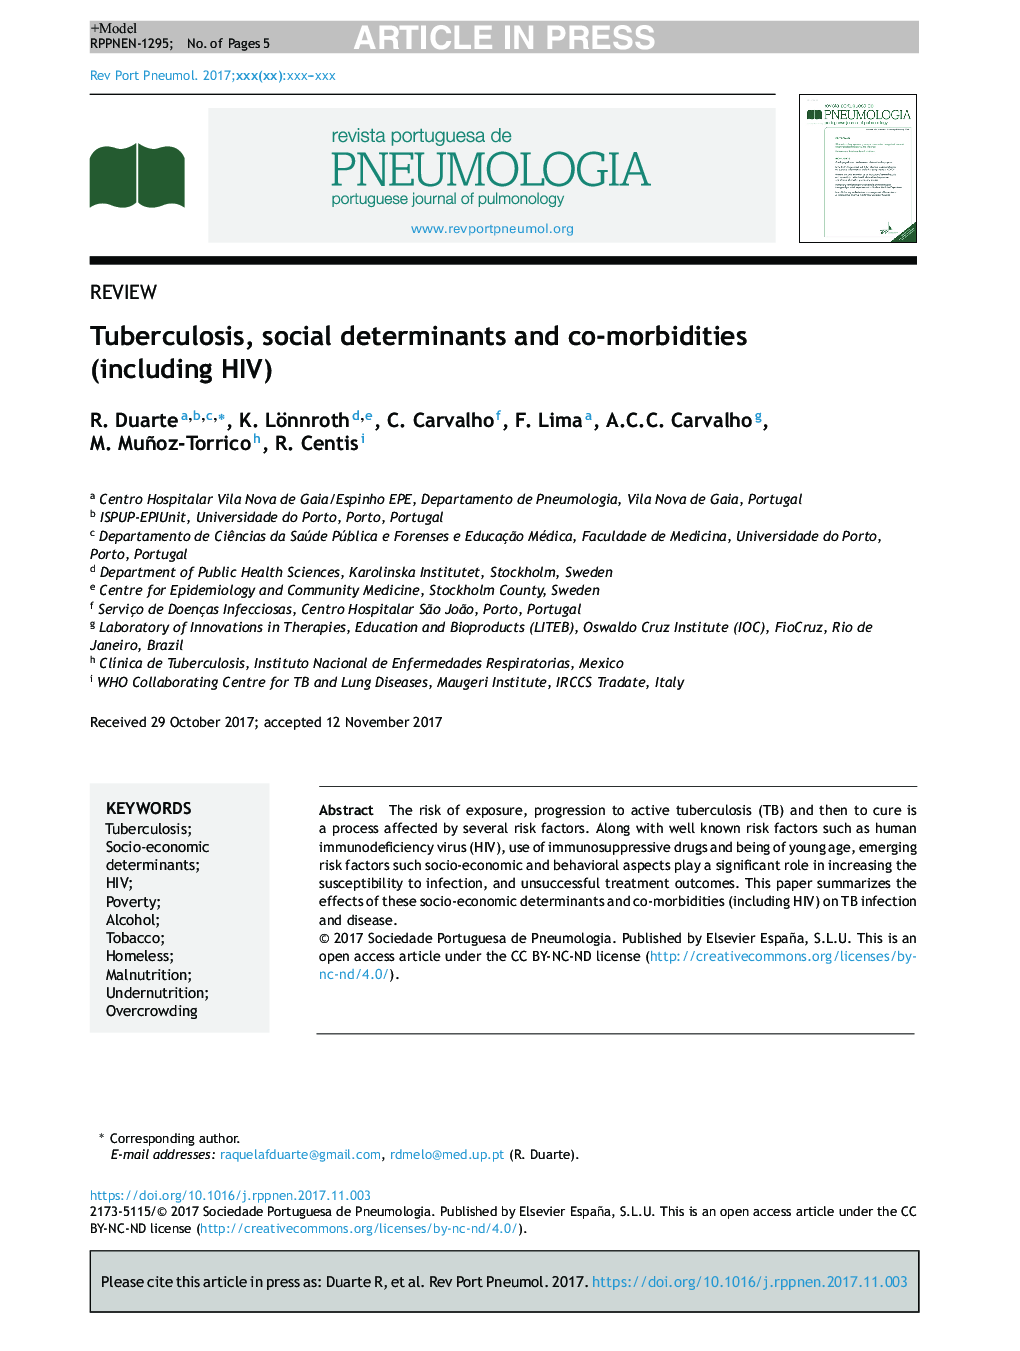 Tuberculosis, social determinants and co-morbidities (including HIV)